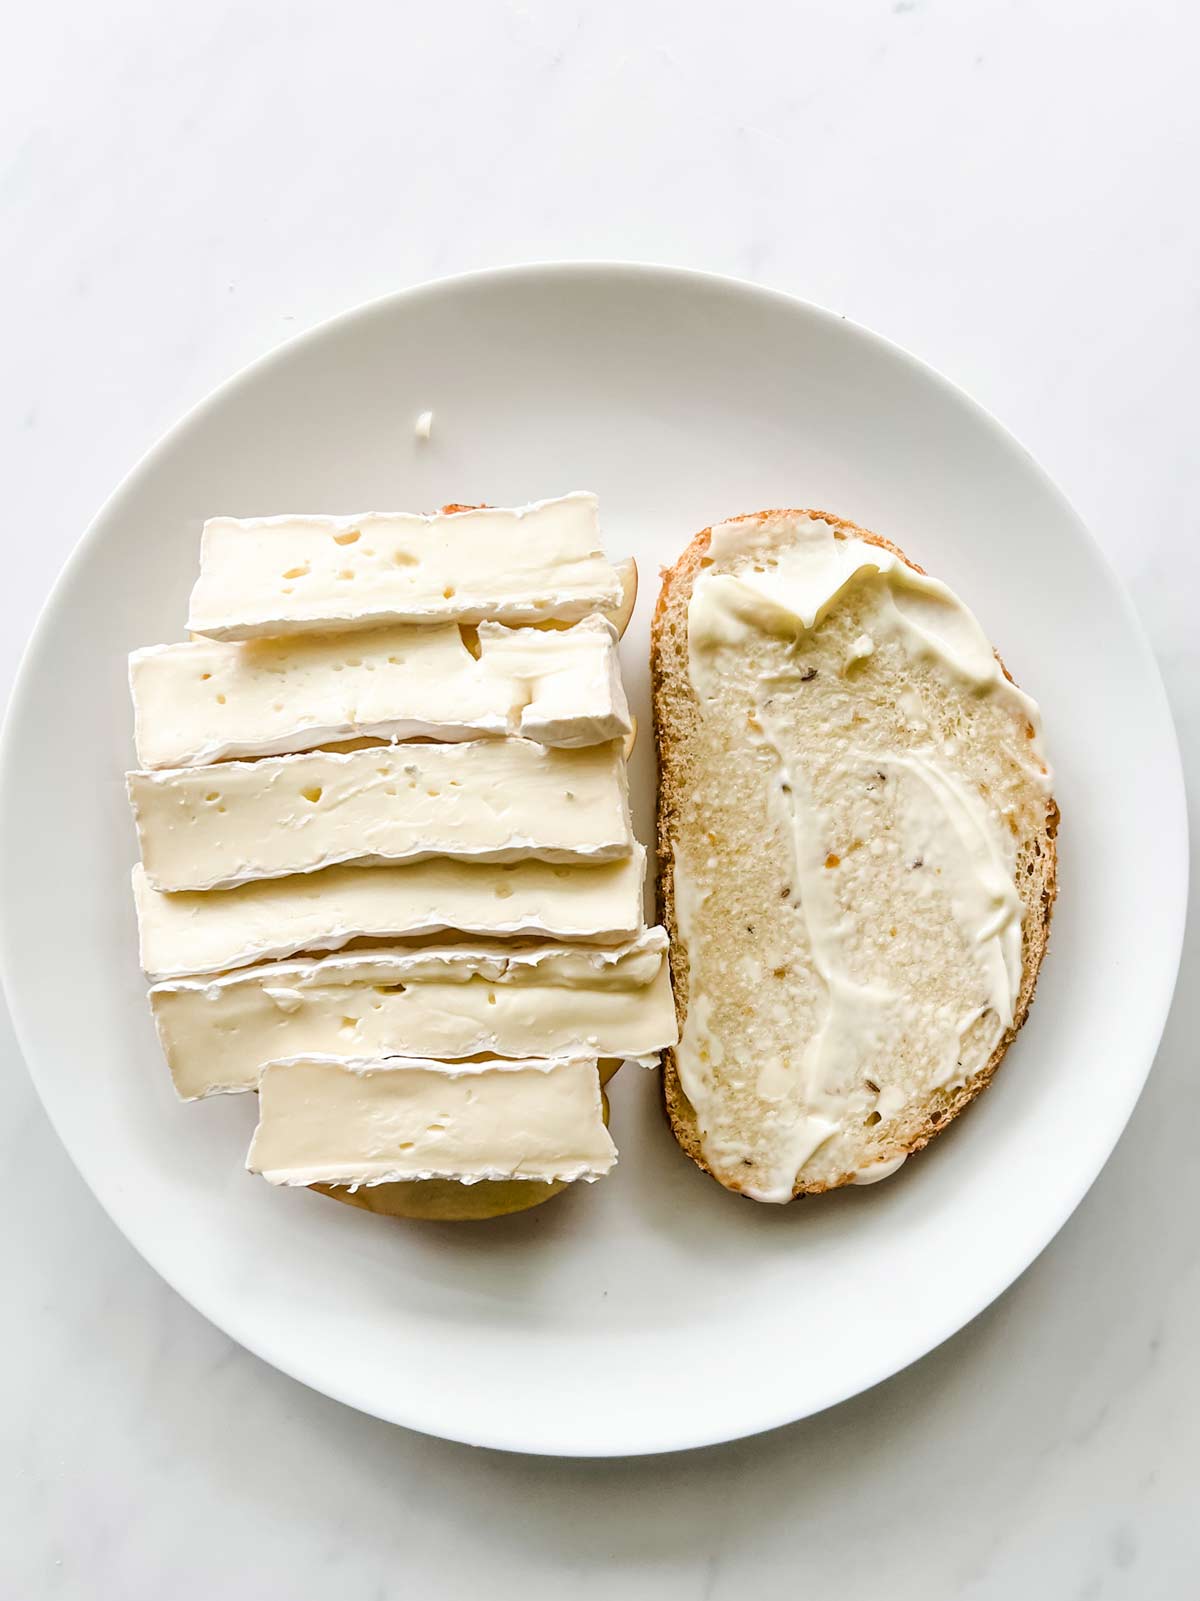 Photo of a slice of bread with brie and another with mayonnaise.